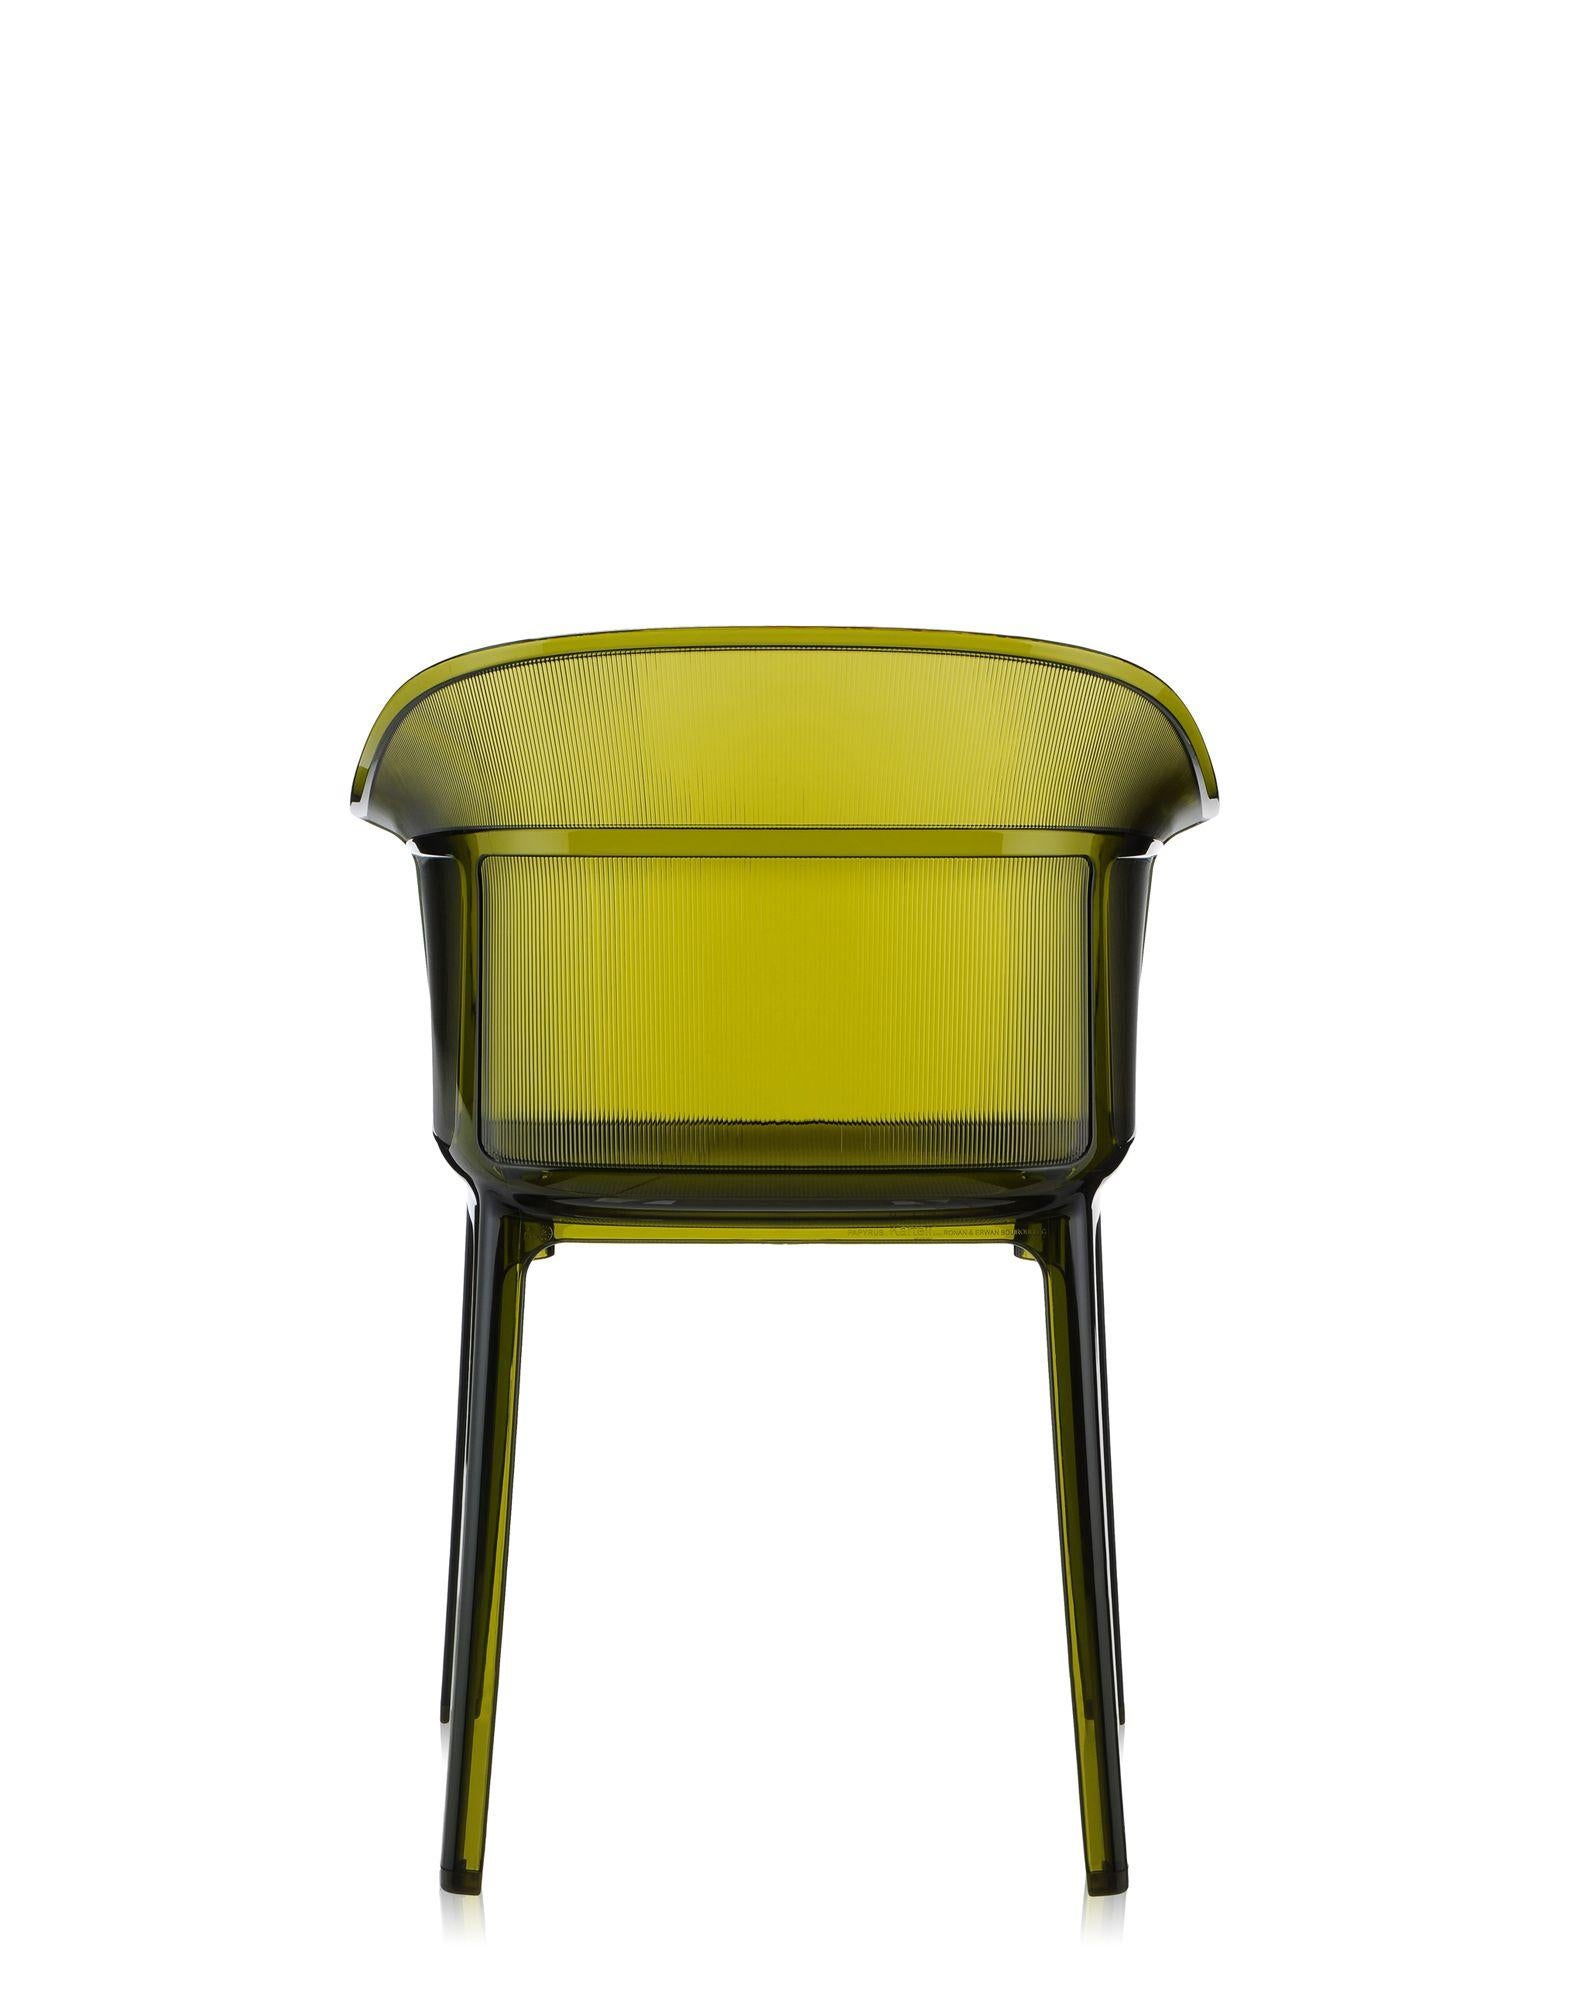 Italian Set of 2 Kartell Papyrus Chair in Olive Green by Ronan & Erwan Bouroullec For Sale